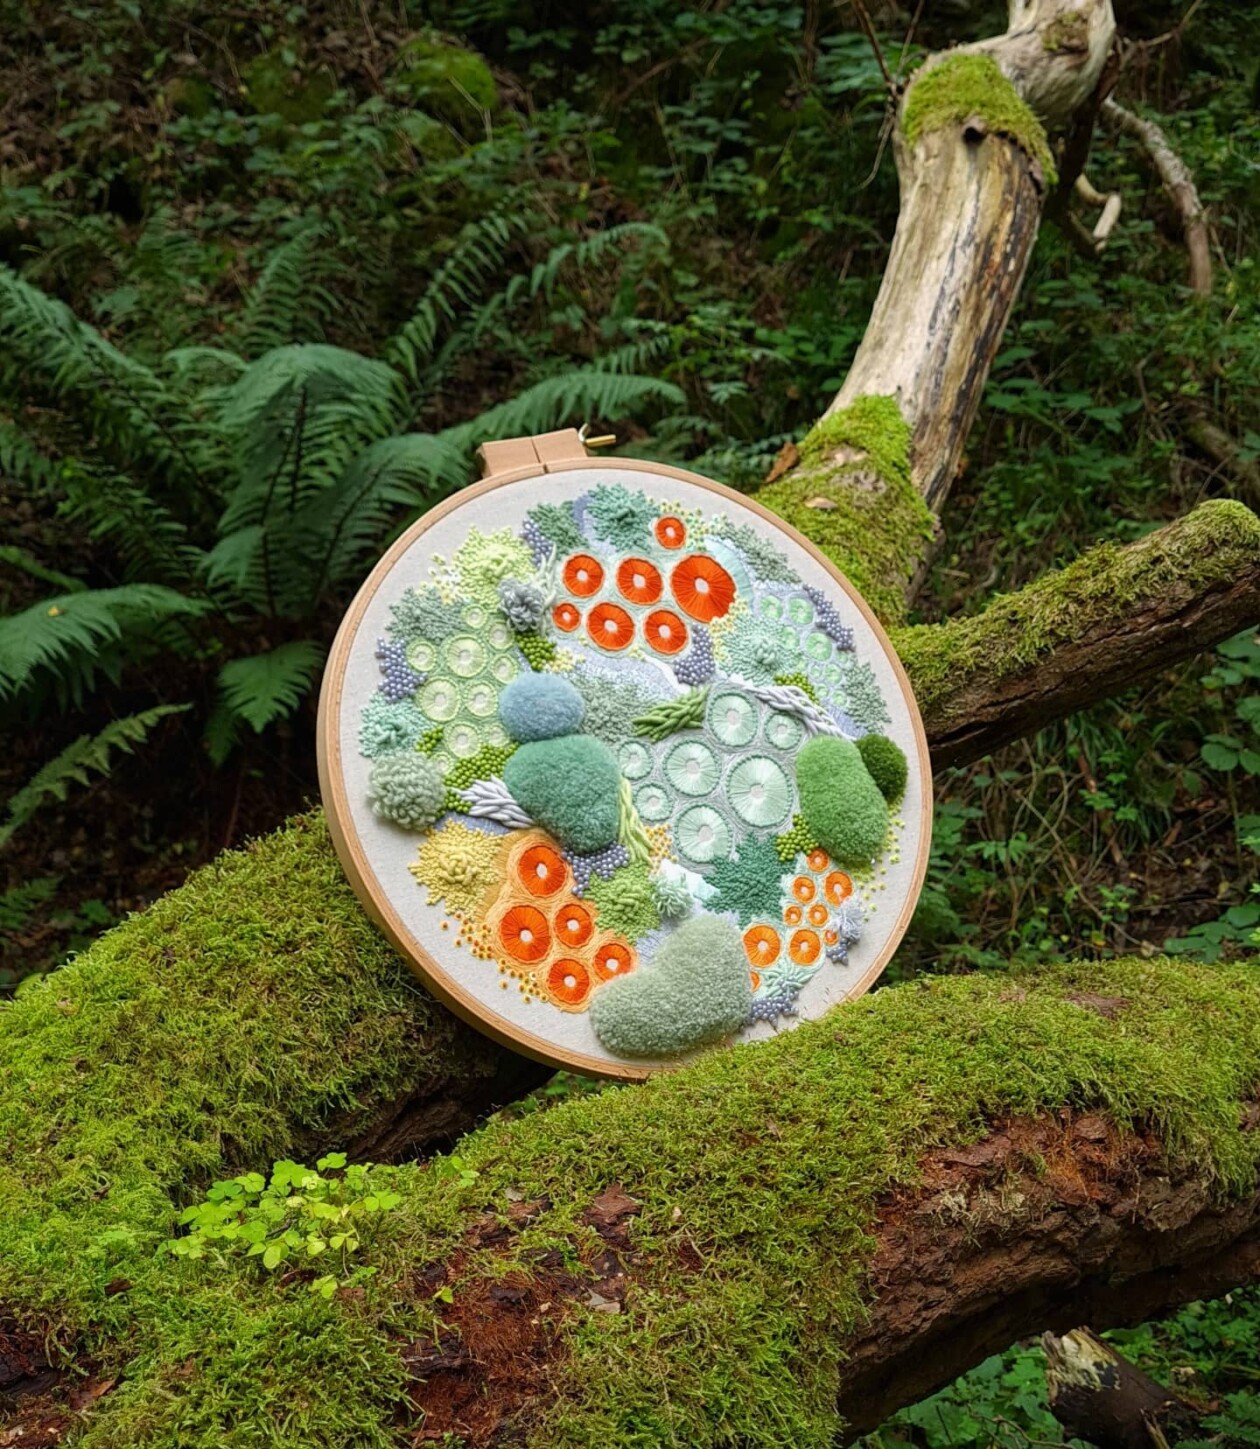 Marvelous Embroideries Inspired By Moss, Coral, And Lichen Forms By Hannah Kwasnycia (17)